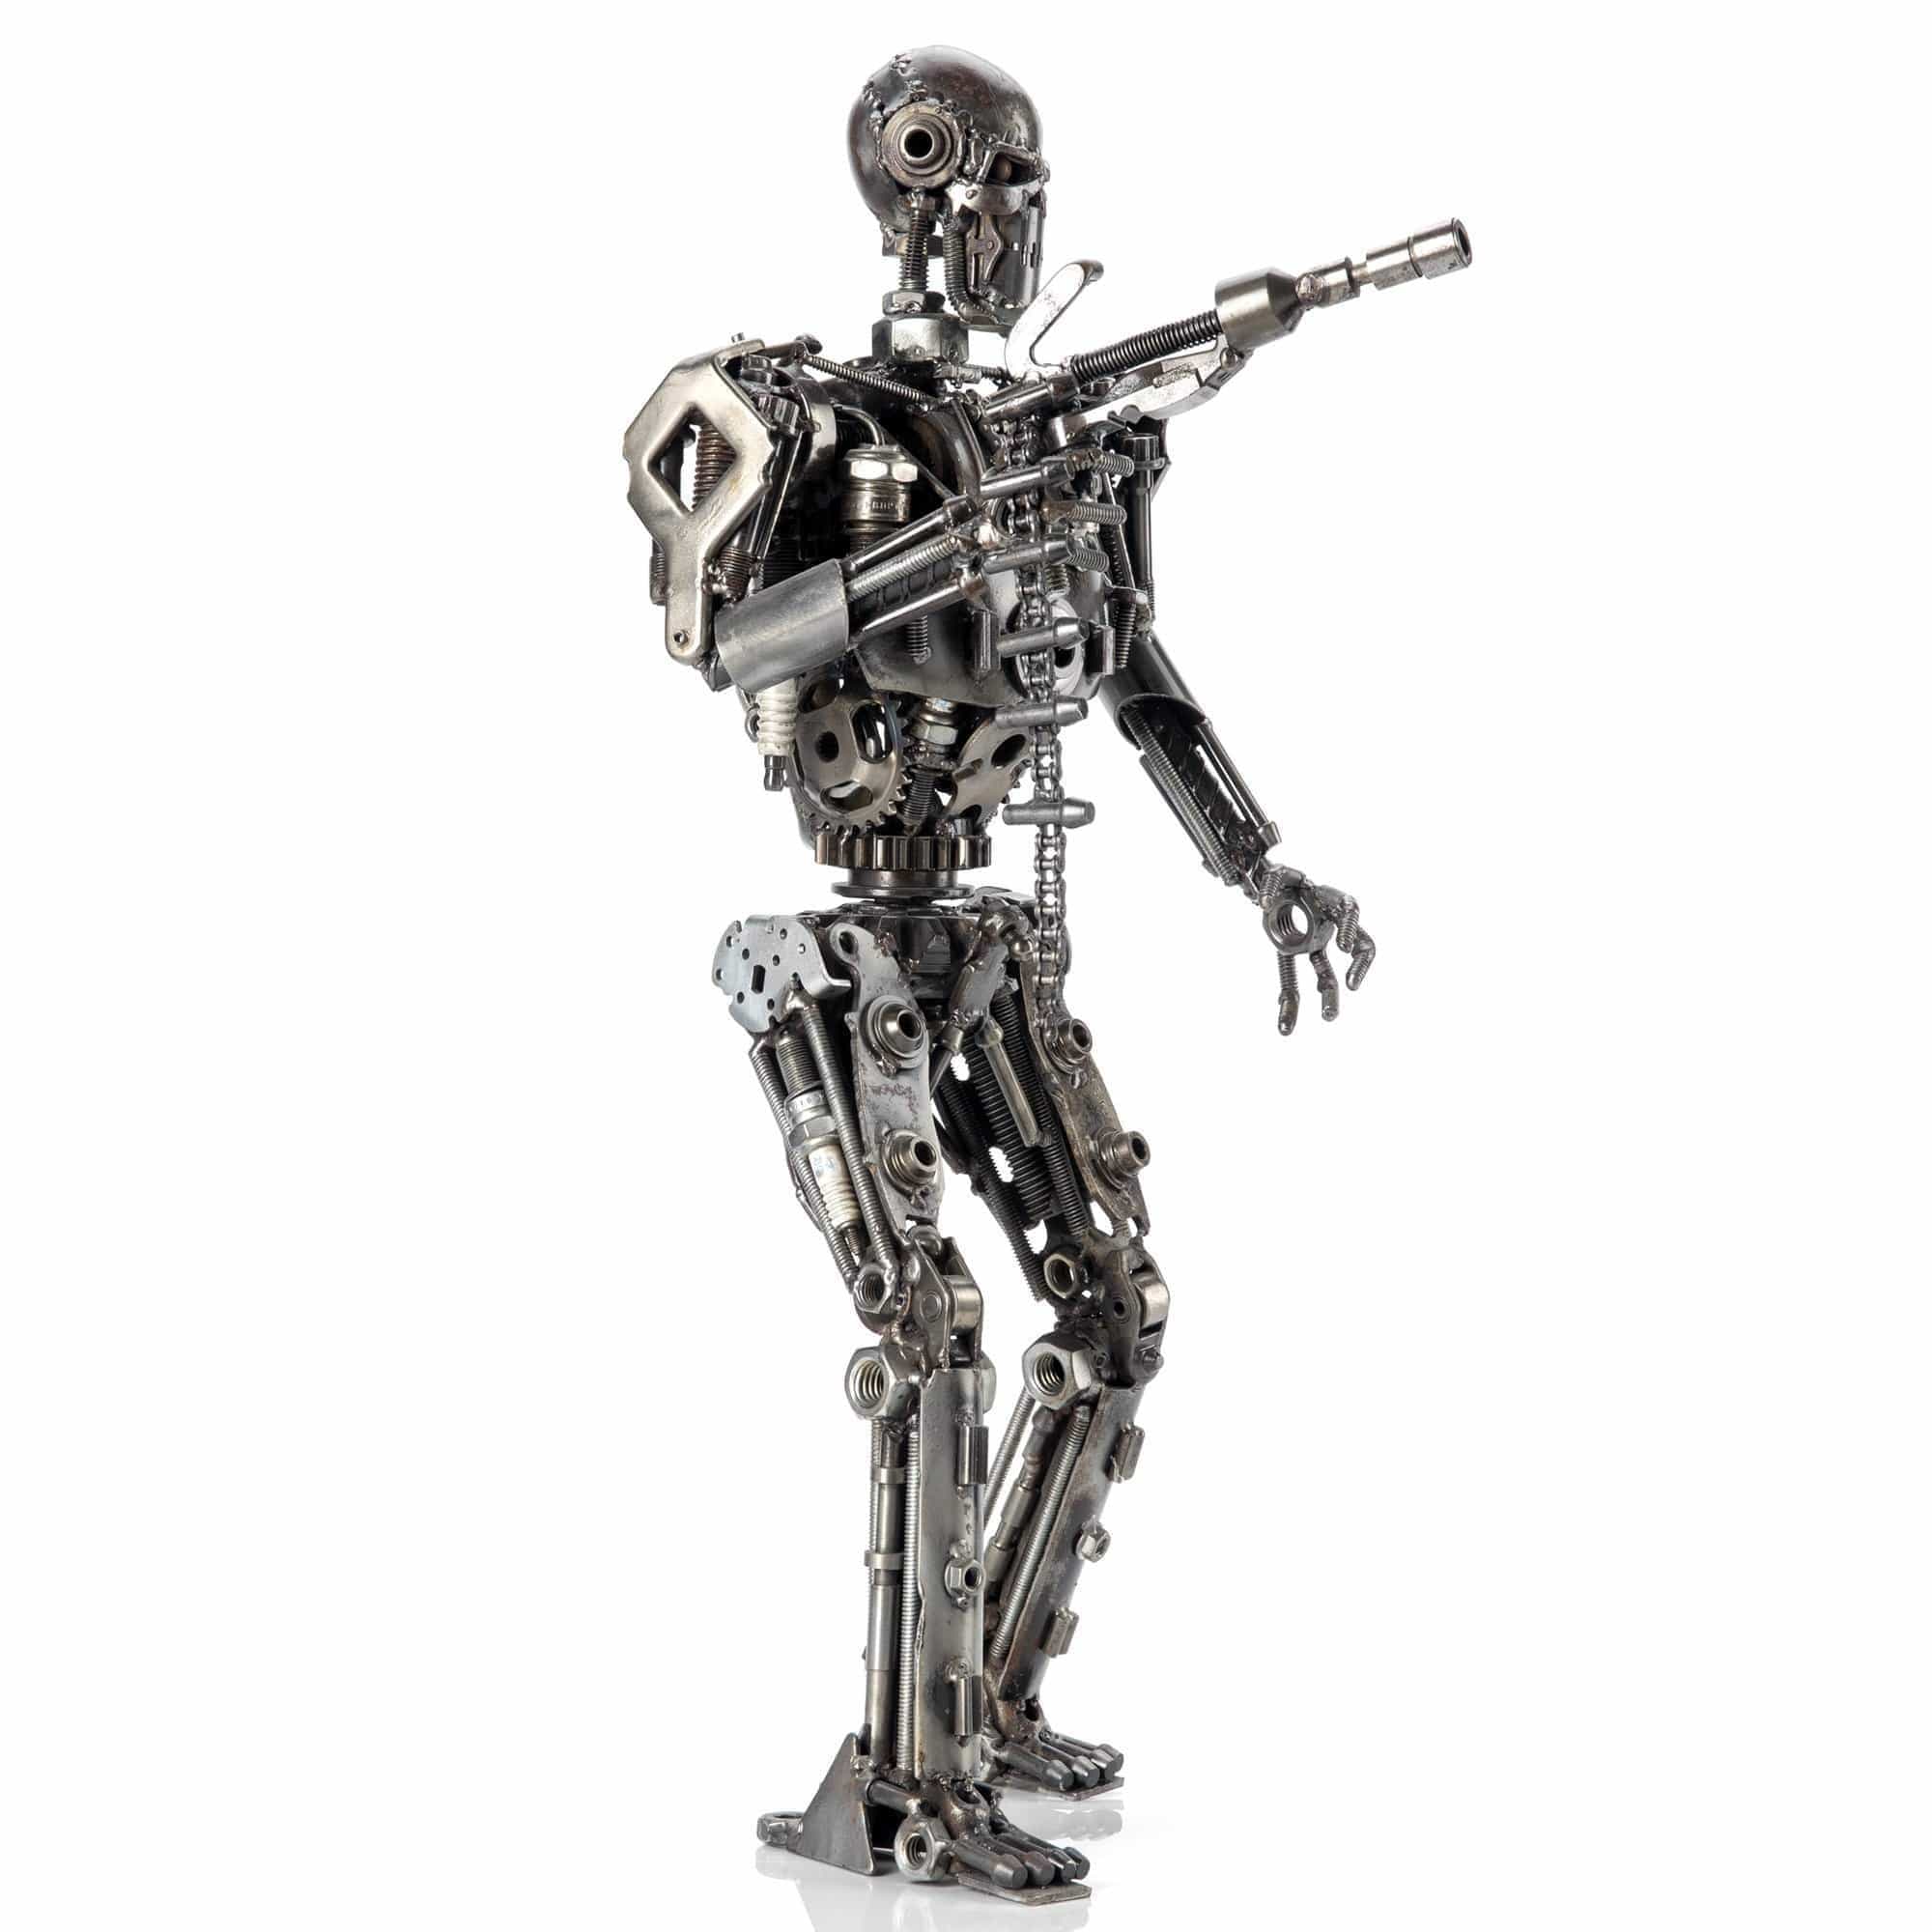 Kalifano Recycled Metal Art Small Terminator Inspired Recycled Metal Sculpture RMS-T52x30-S